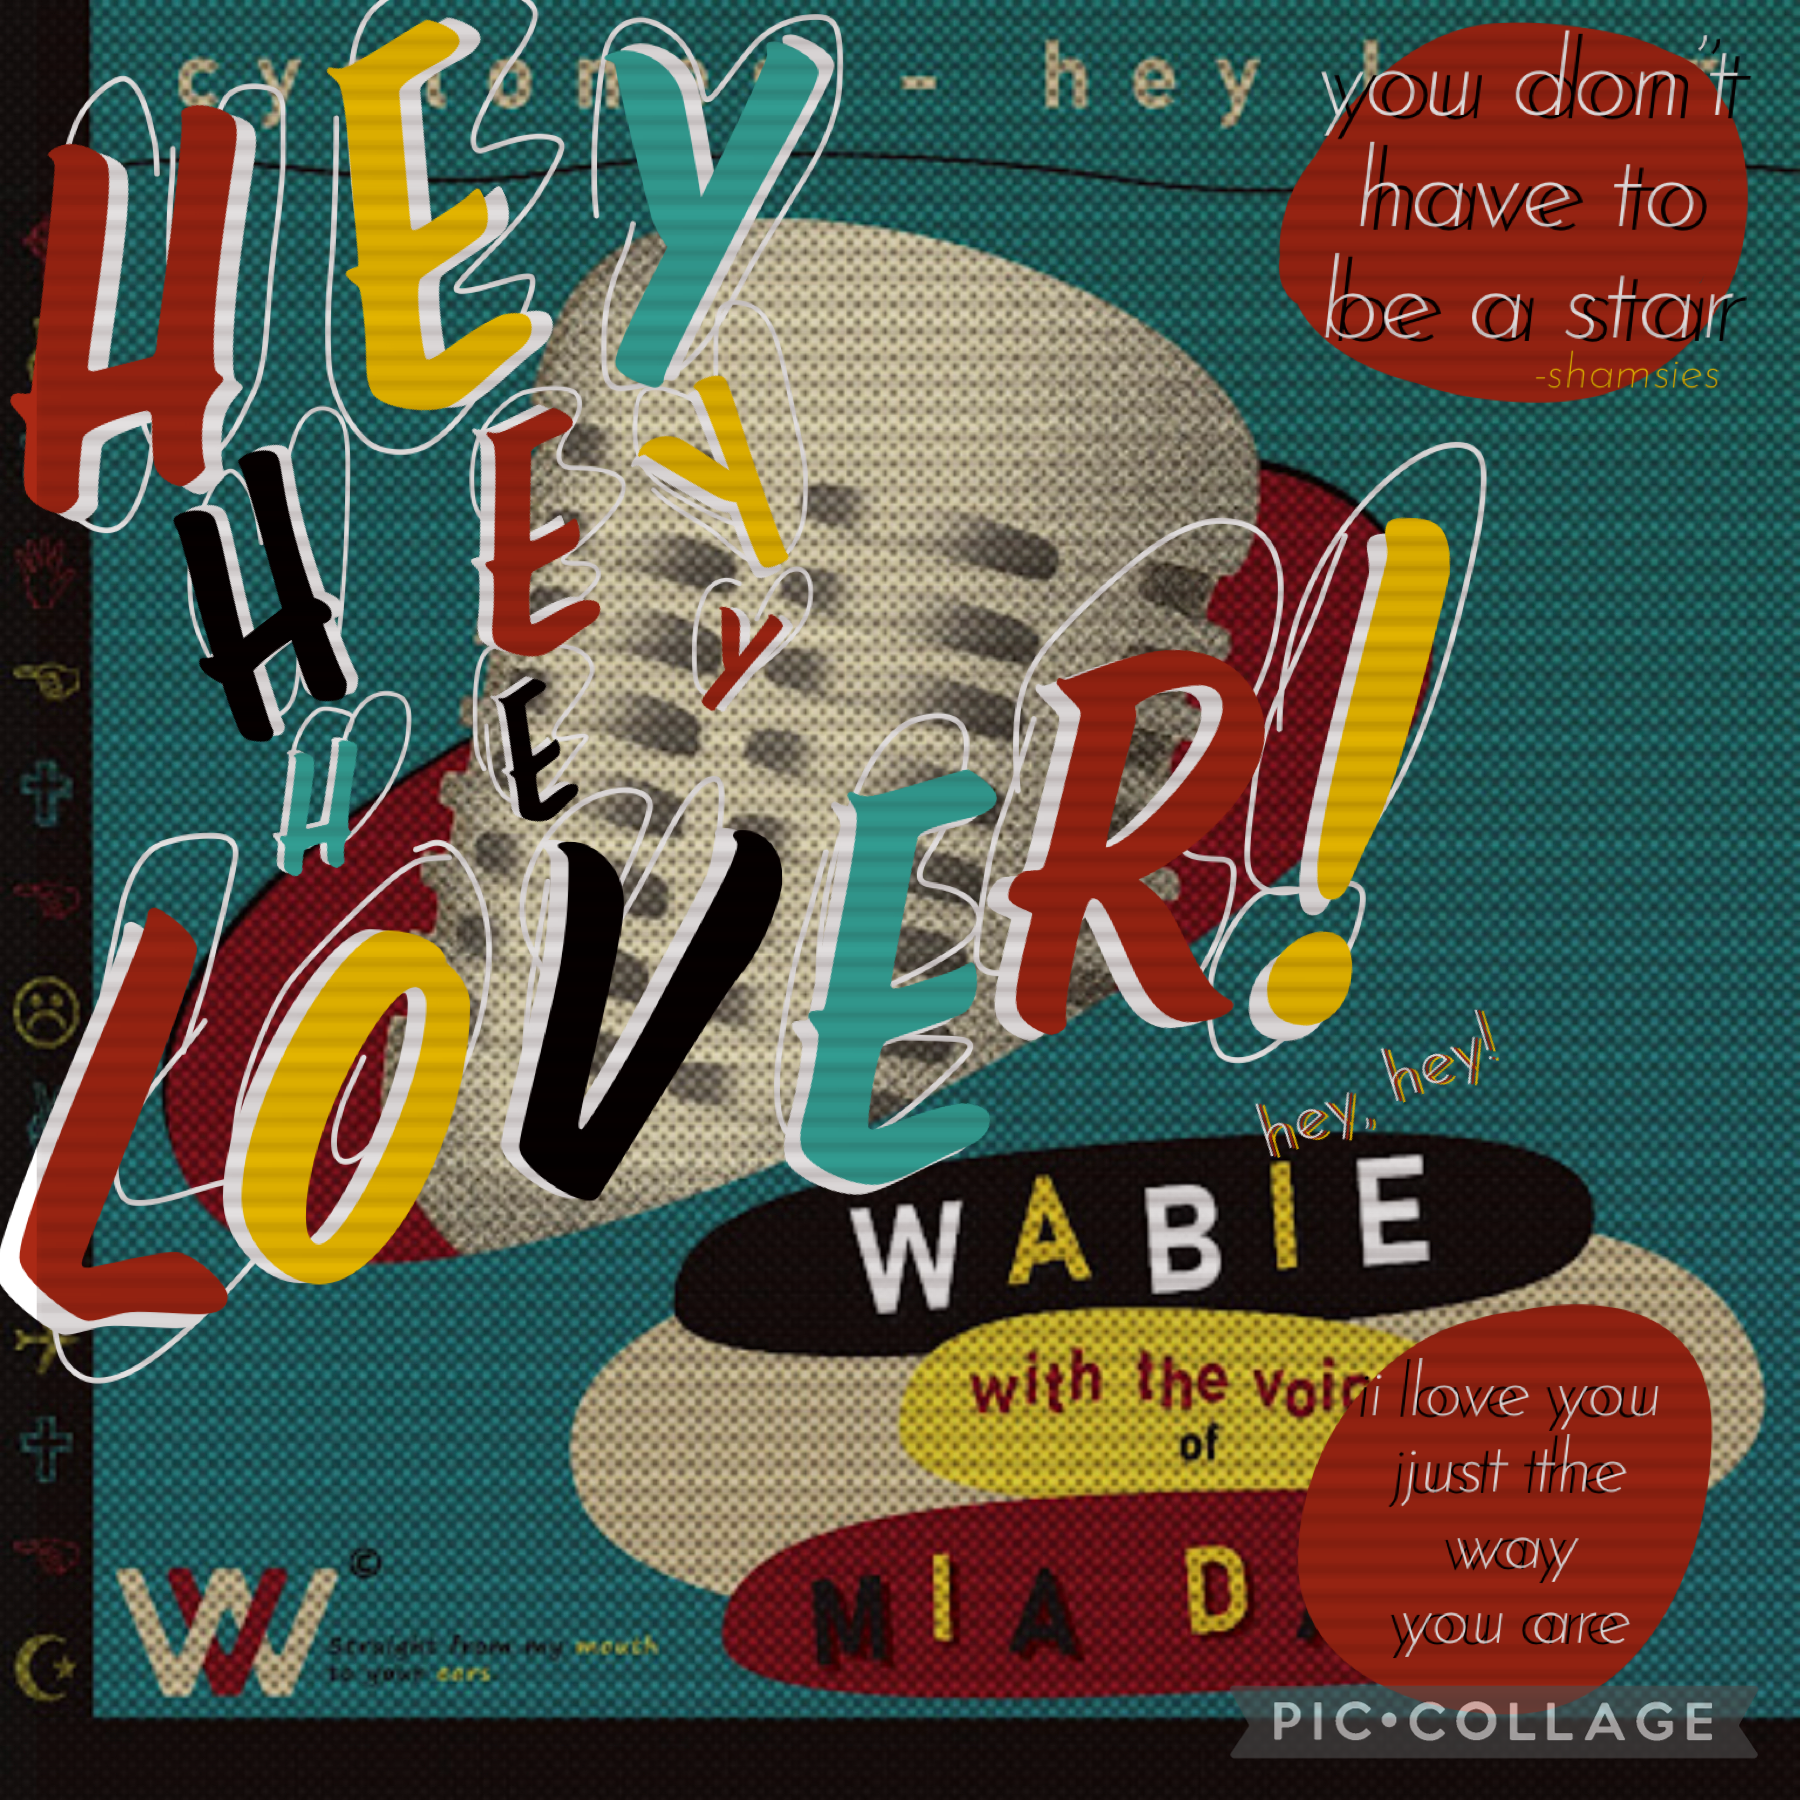 song: hey lover - wabie
omg i posted 😱😳😮😱😲😳
anways, might keep doing this so gib songs pls :))